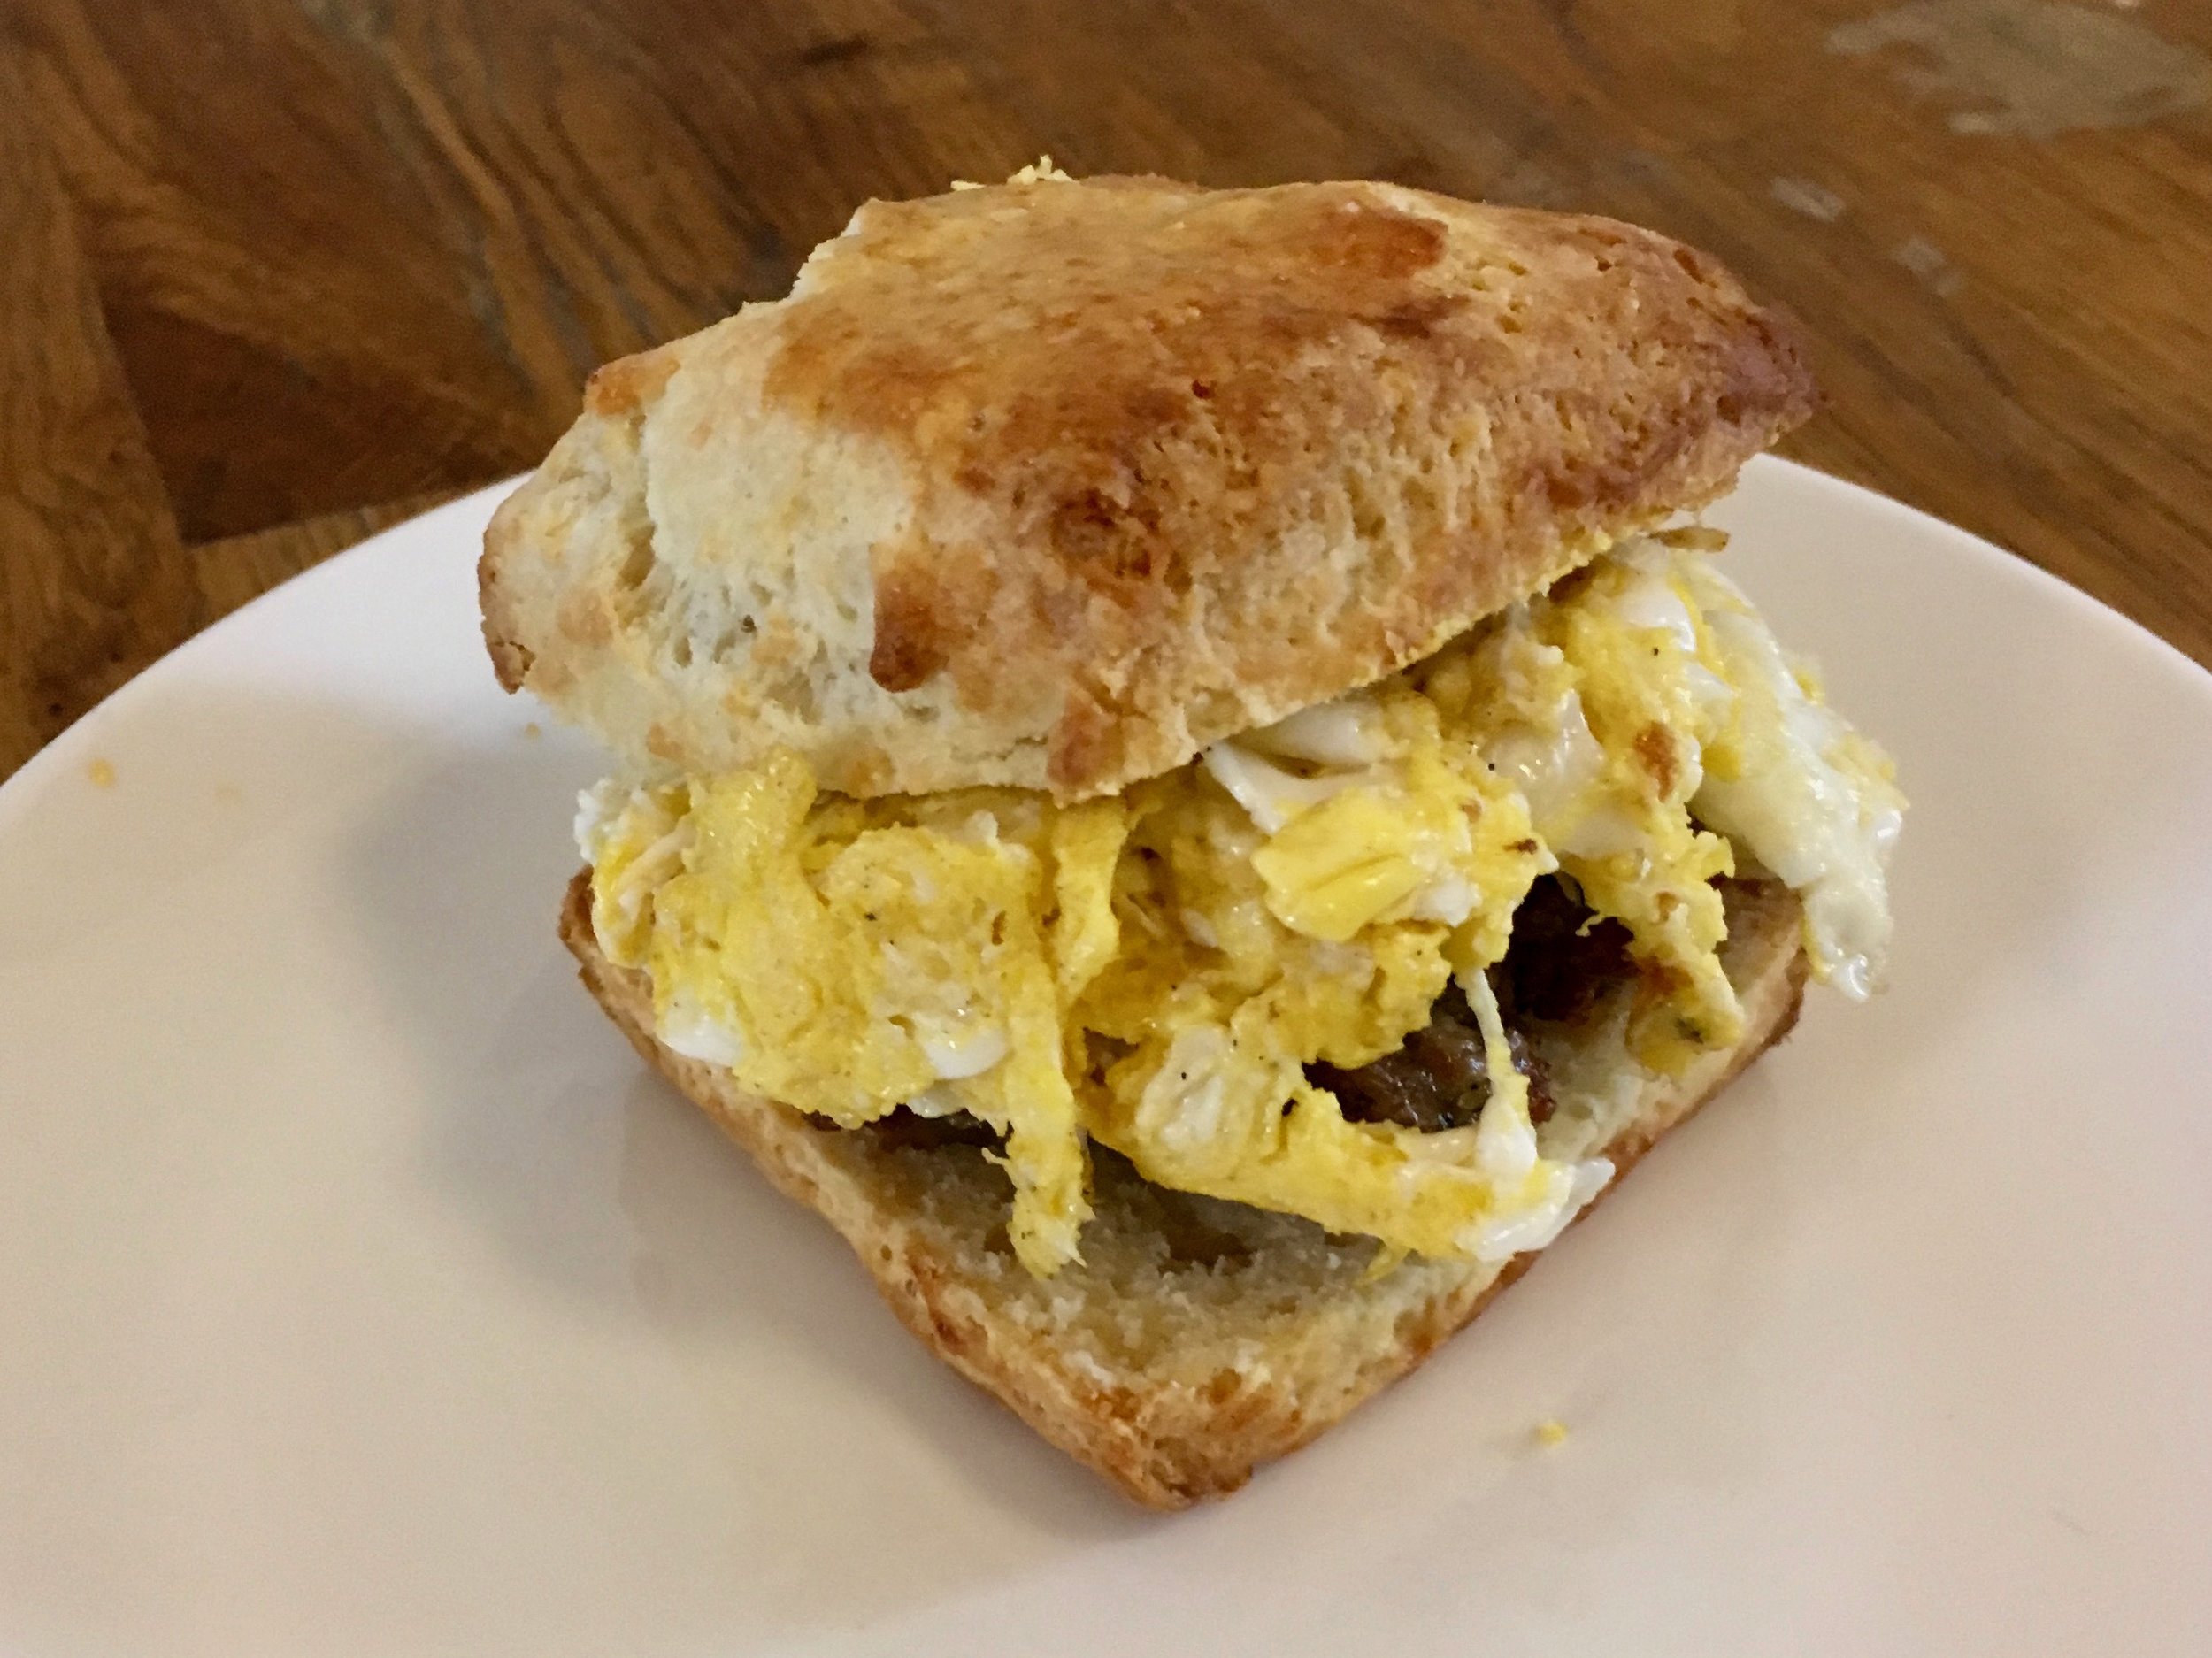 Egg n' biscuitt w/ housemade sausage!